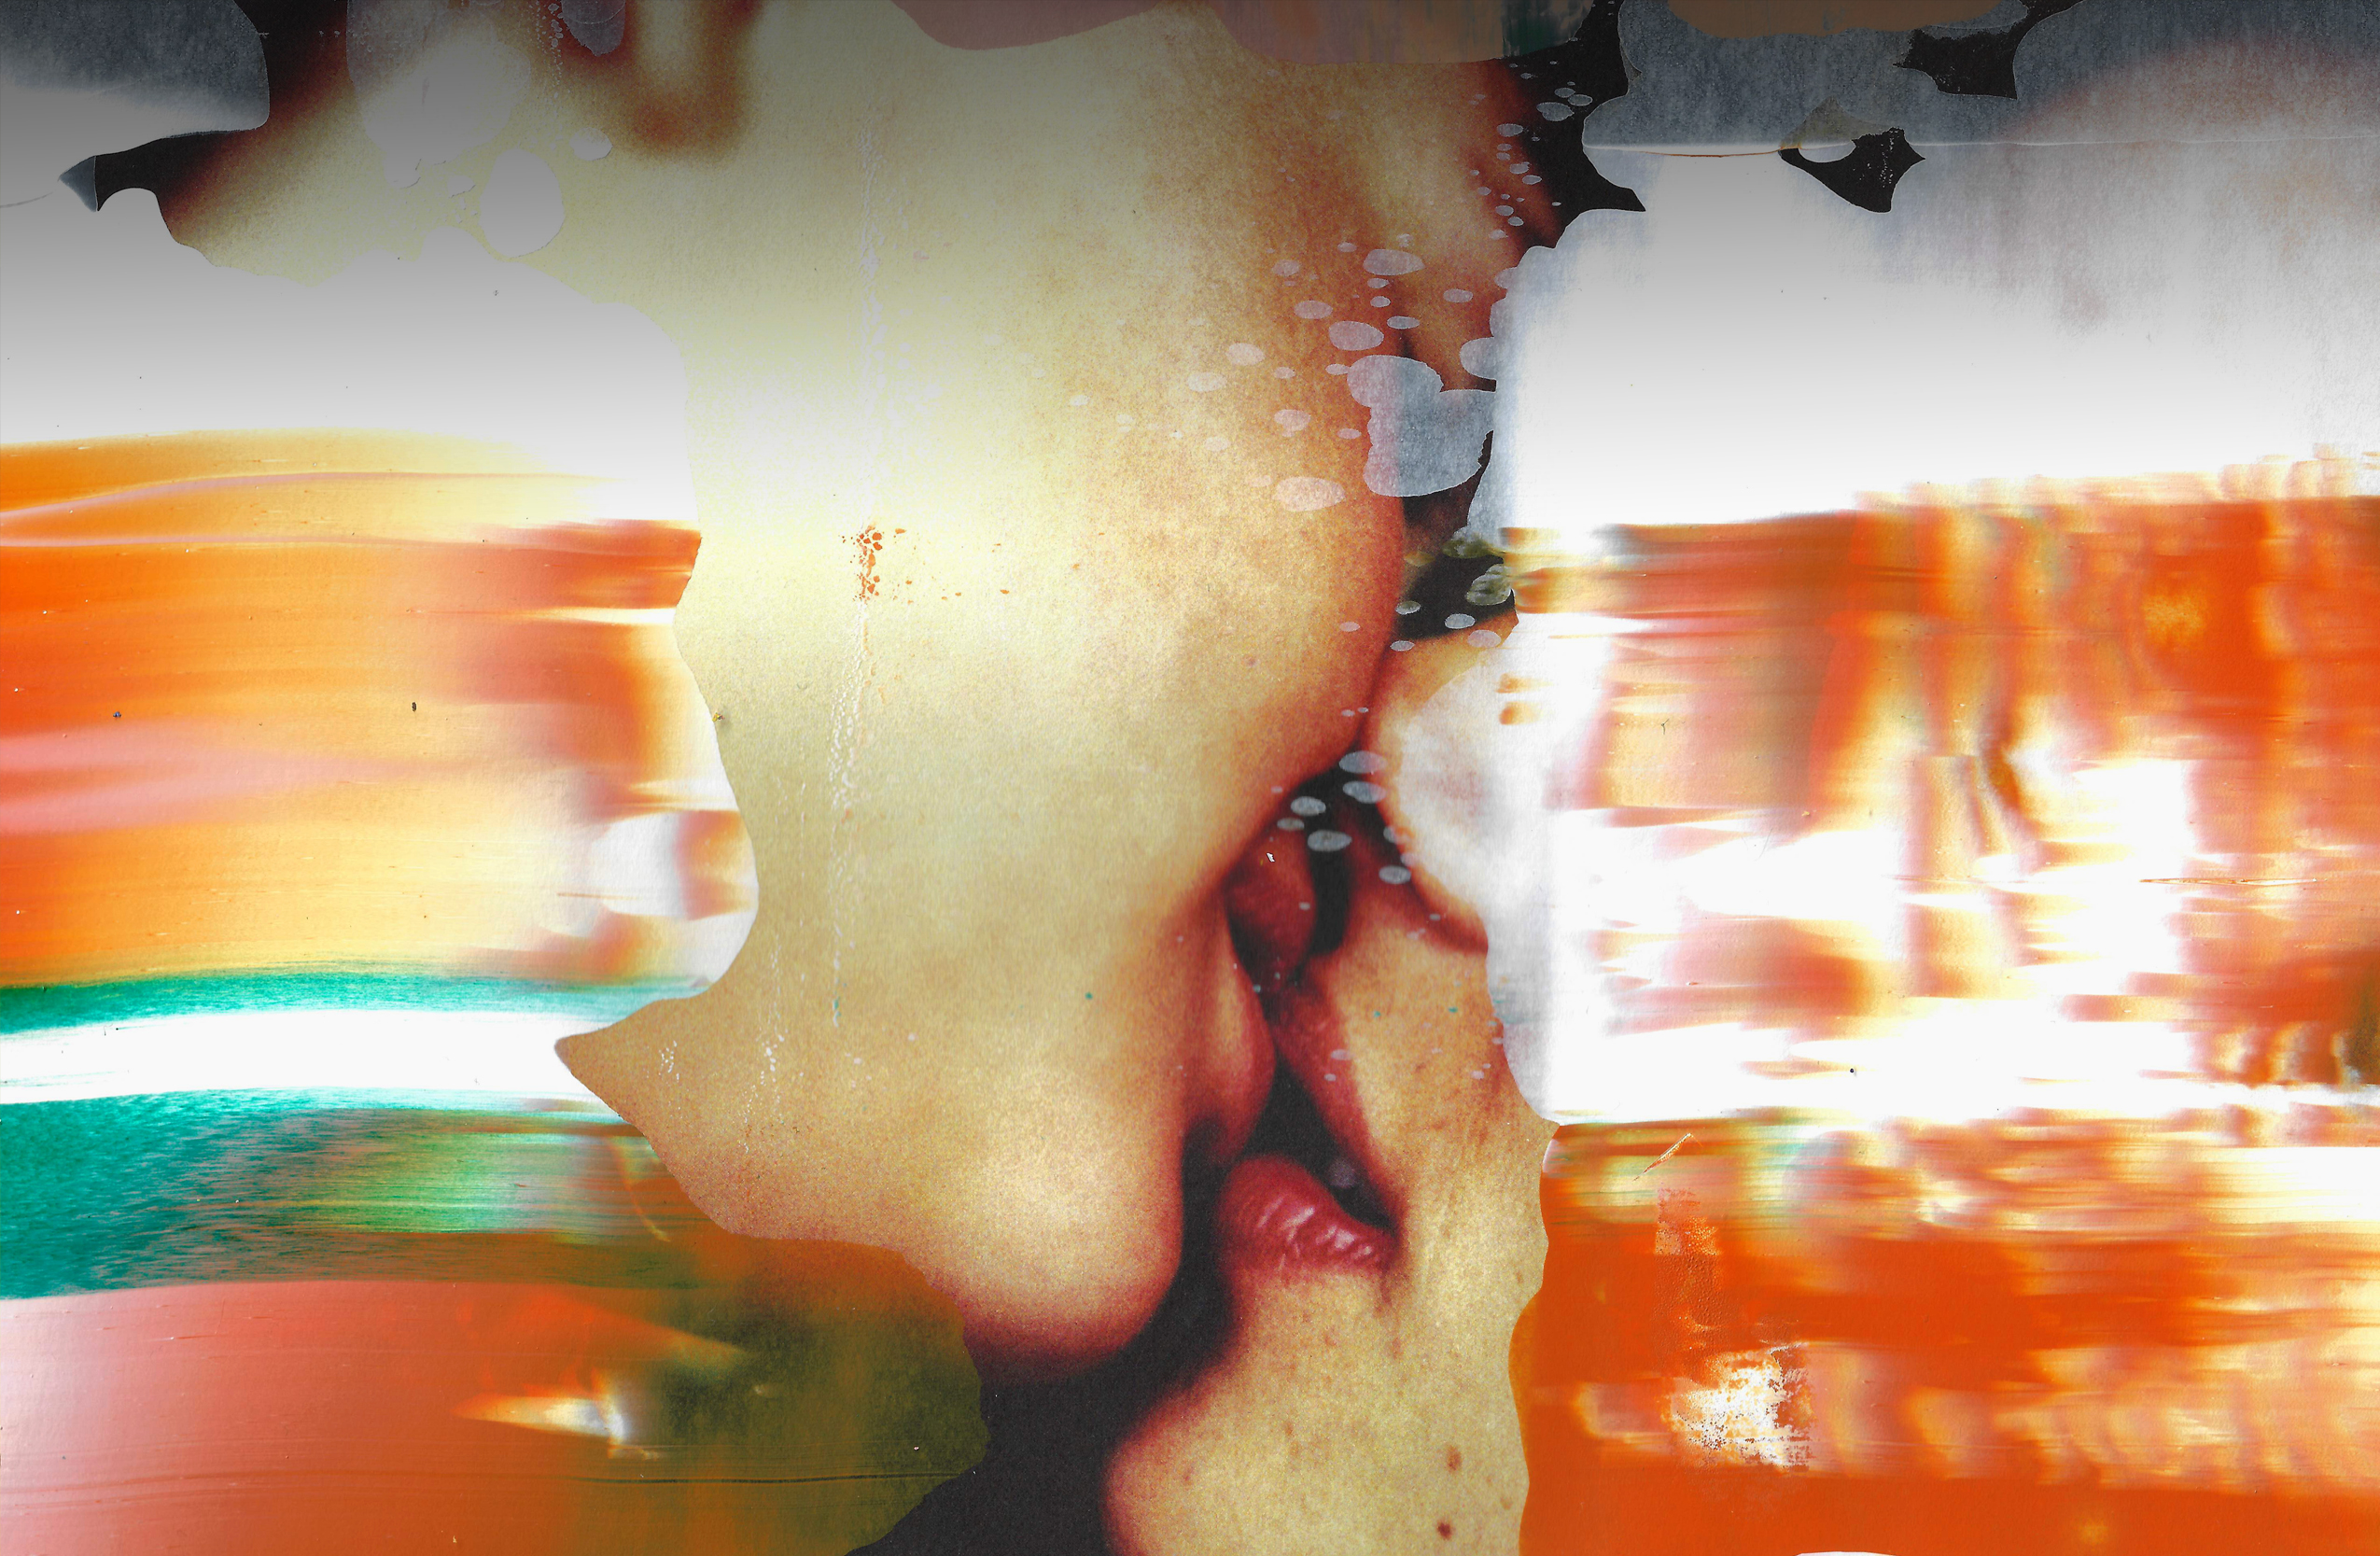 Close up of couple kissing